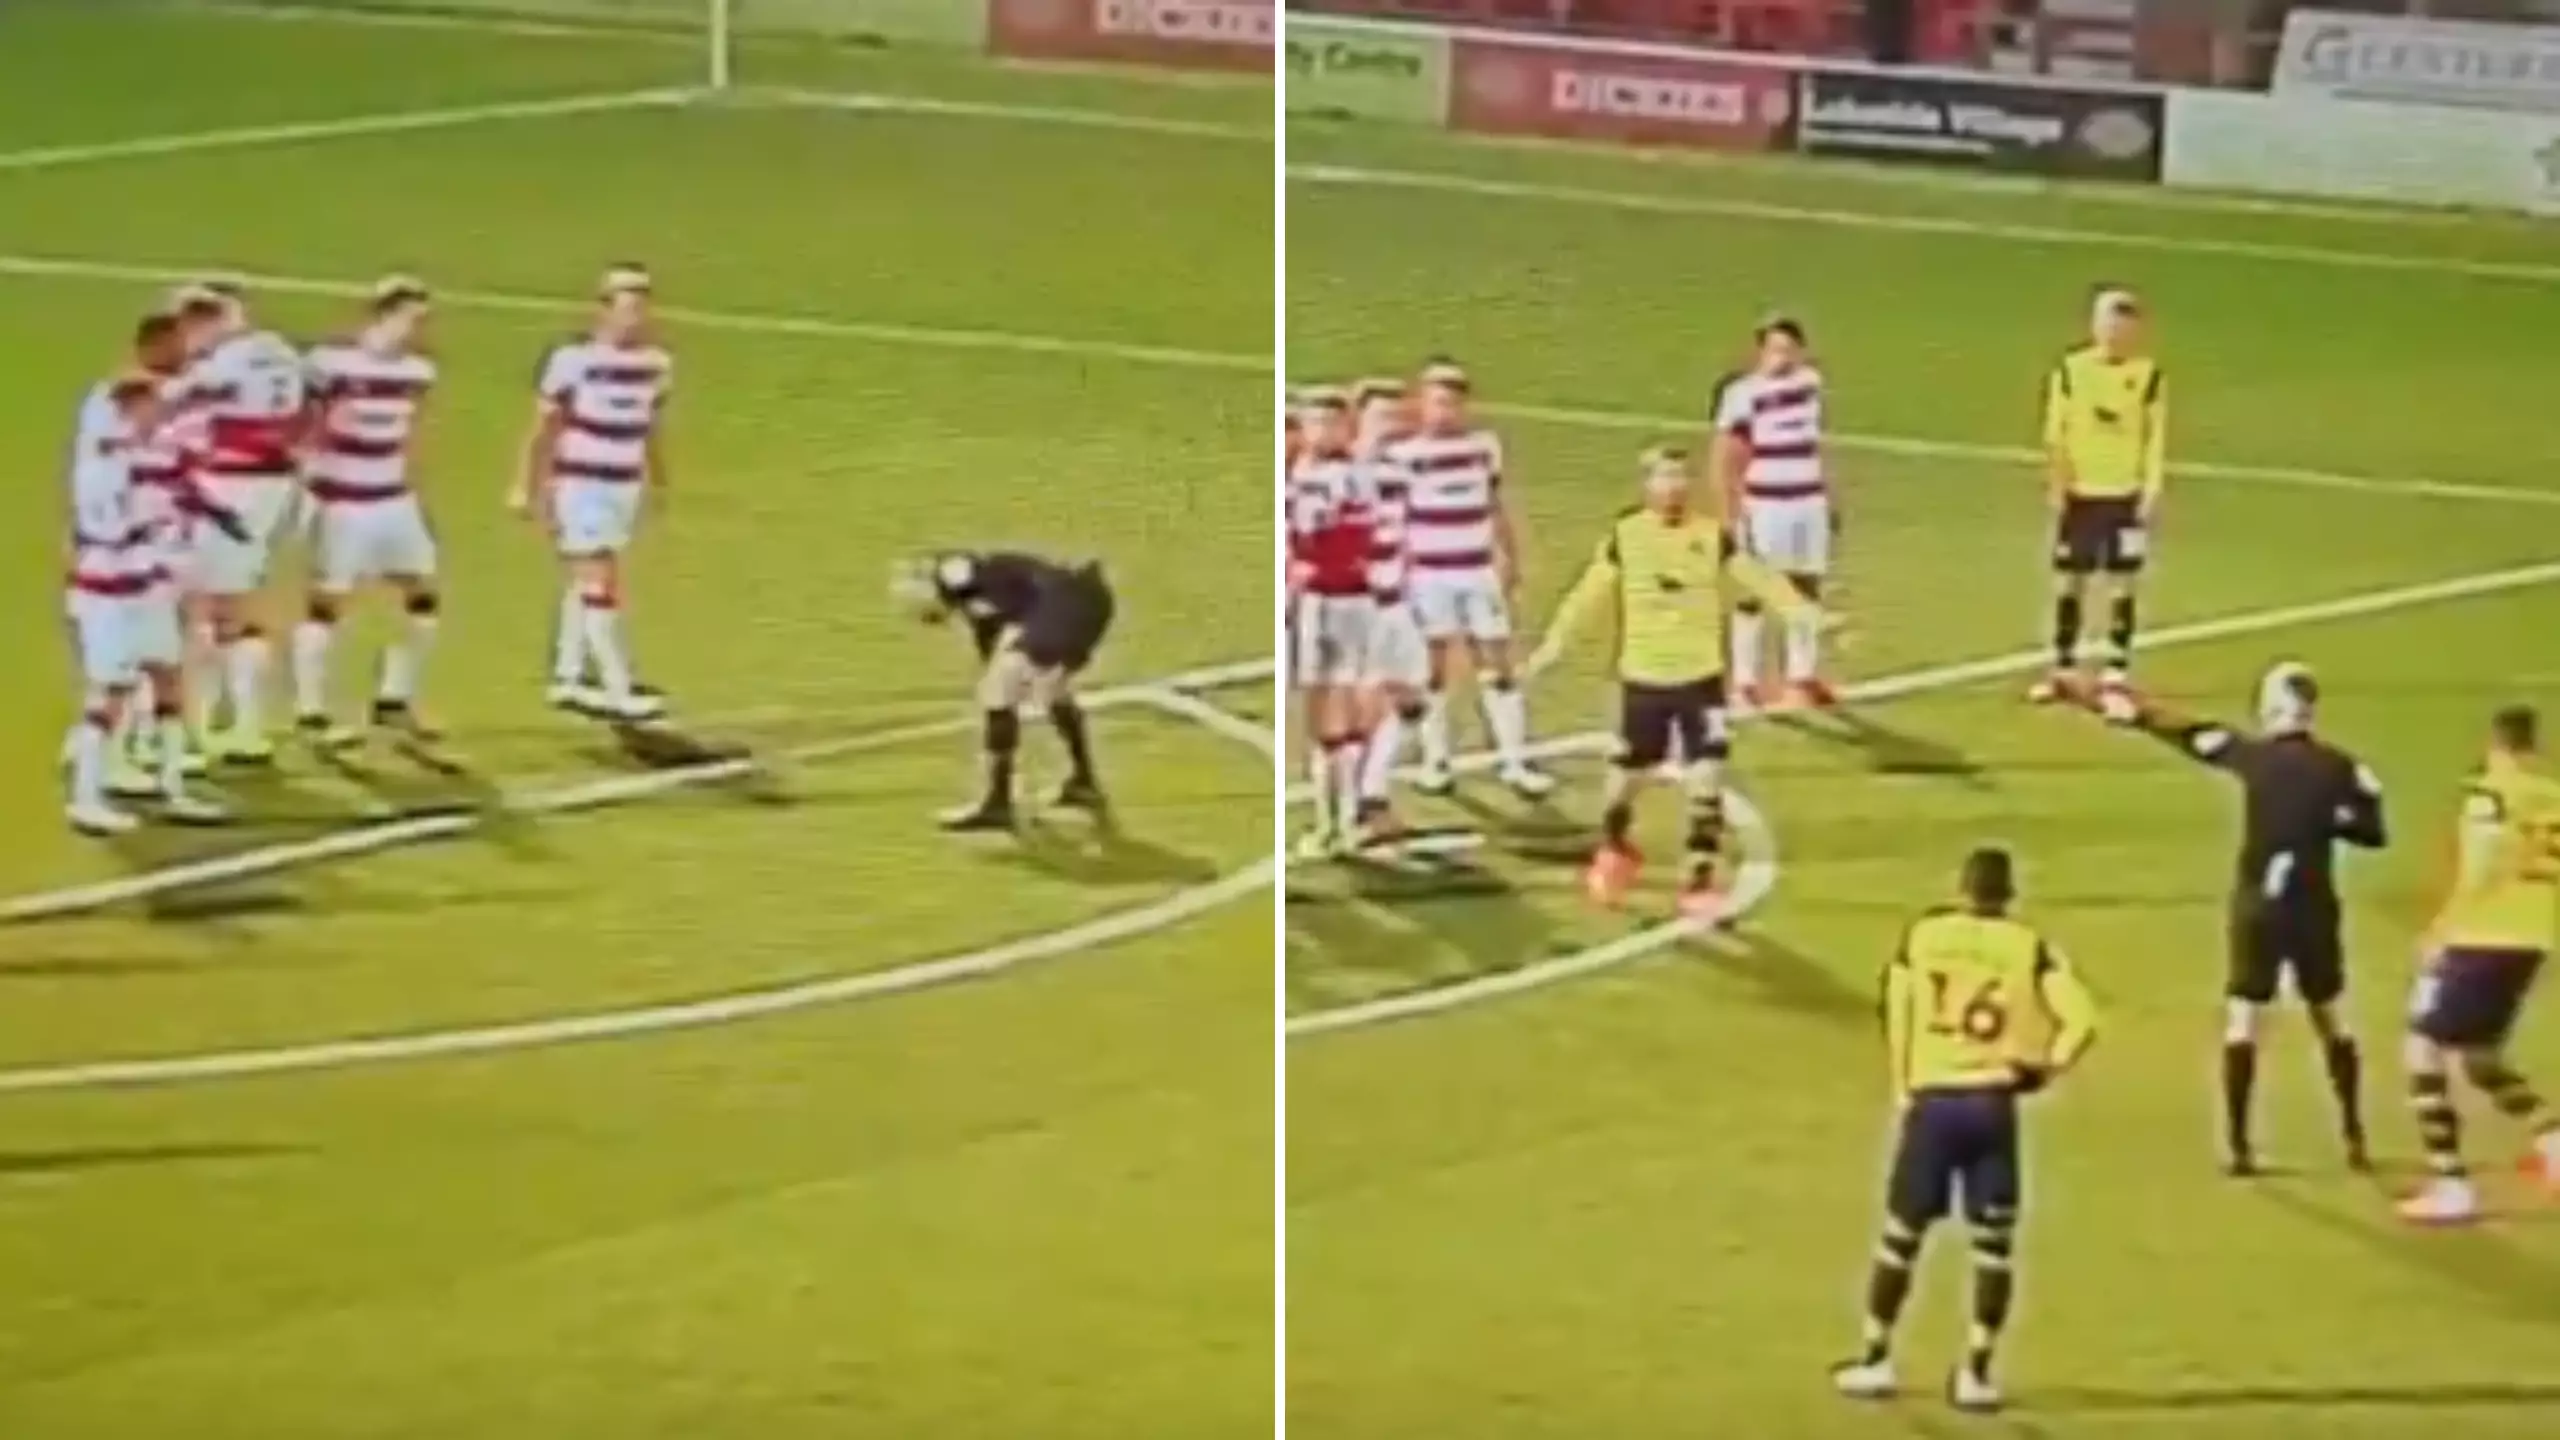 Referee Who 'Can't Even Count To Ten' Has Gone Viral